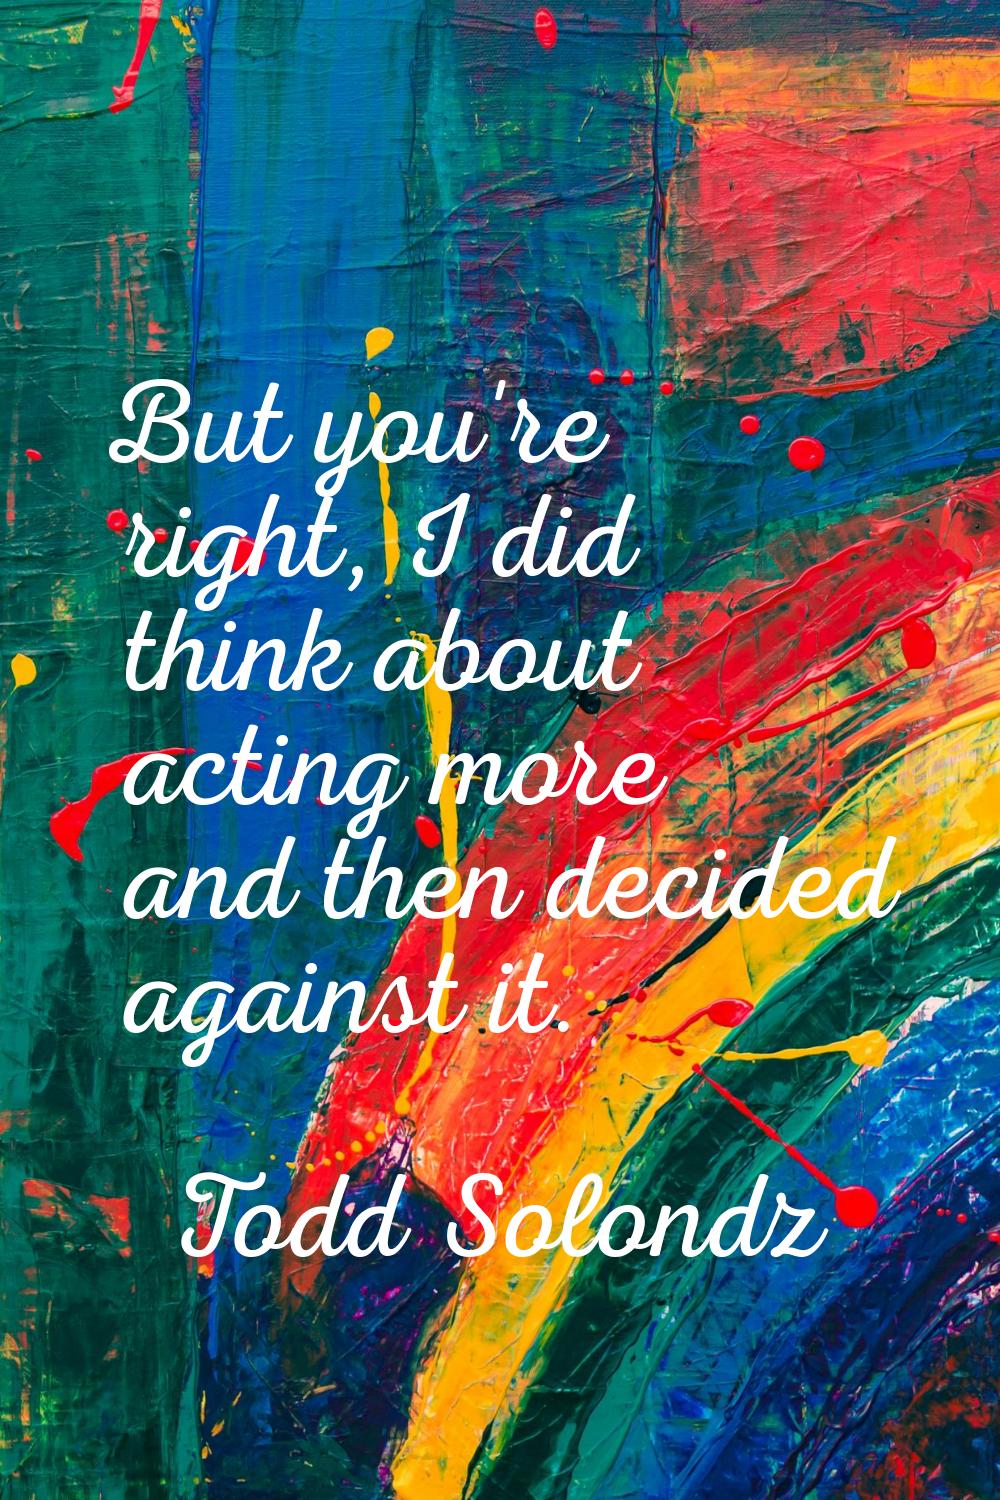 But you're right, I did think about acting more and then decided against it.